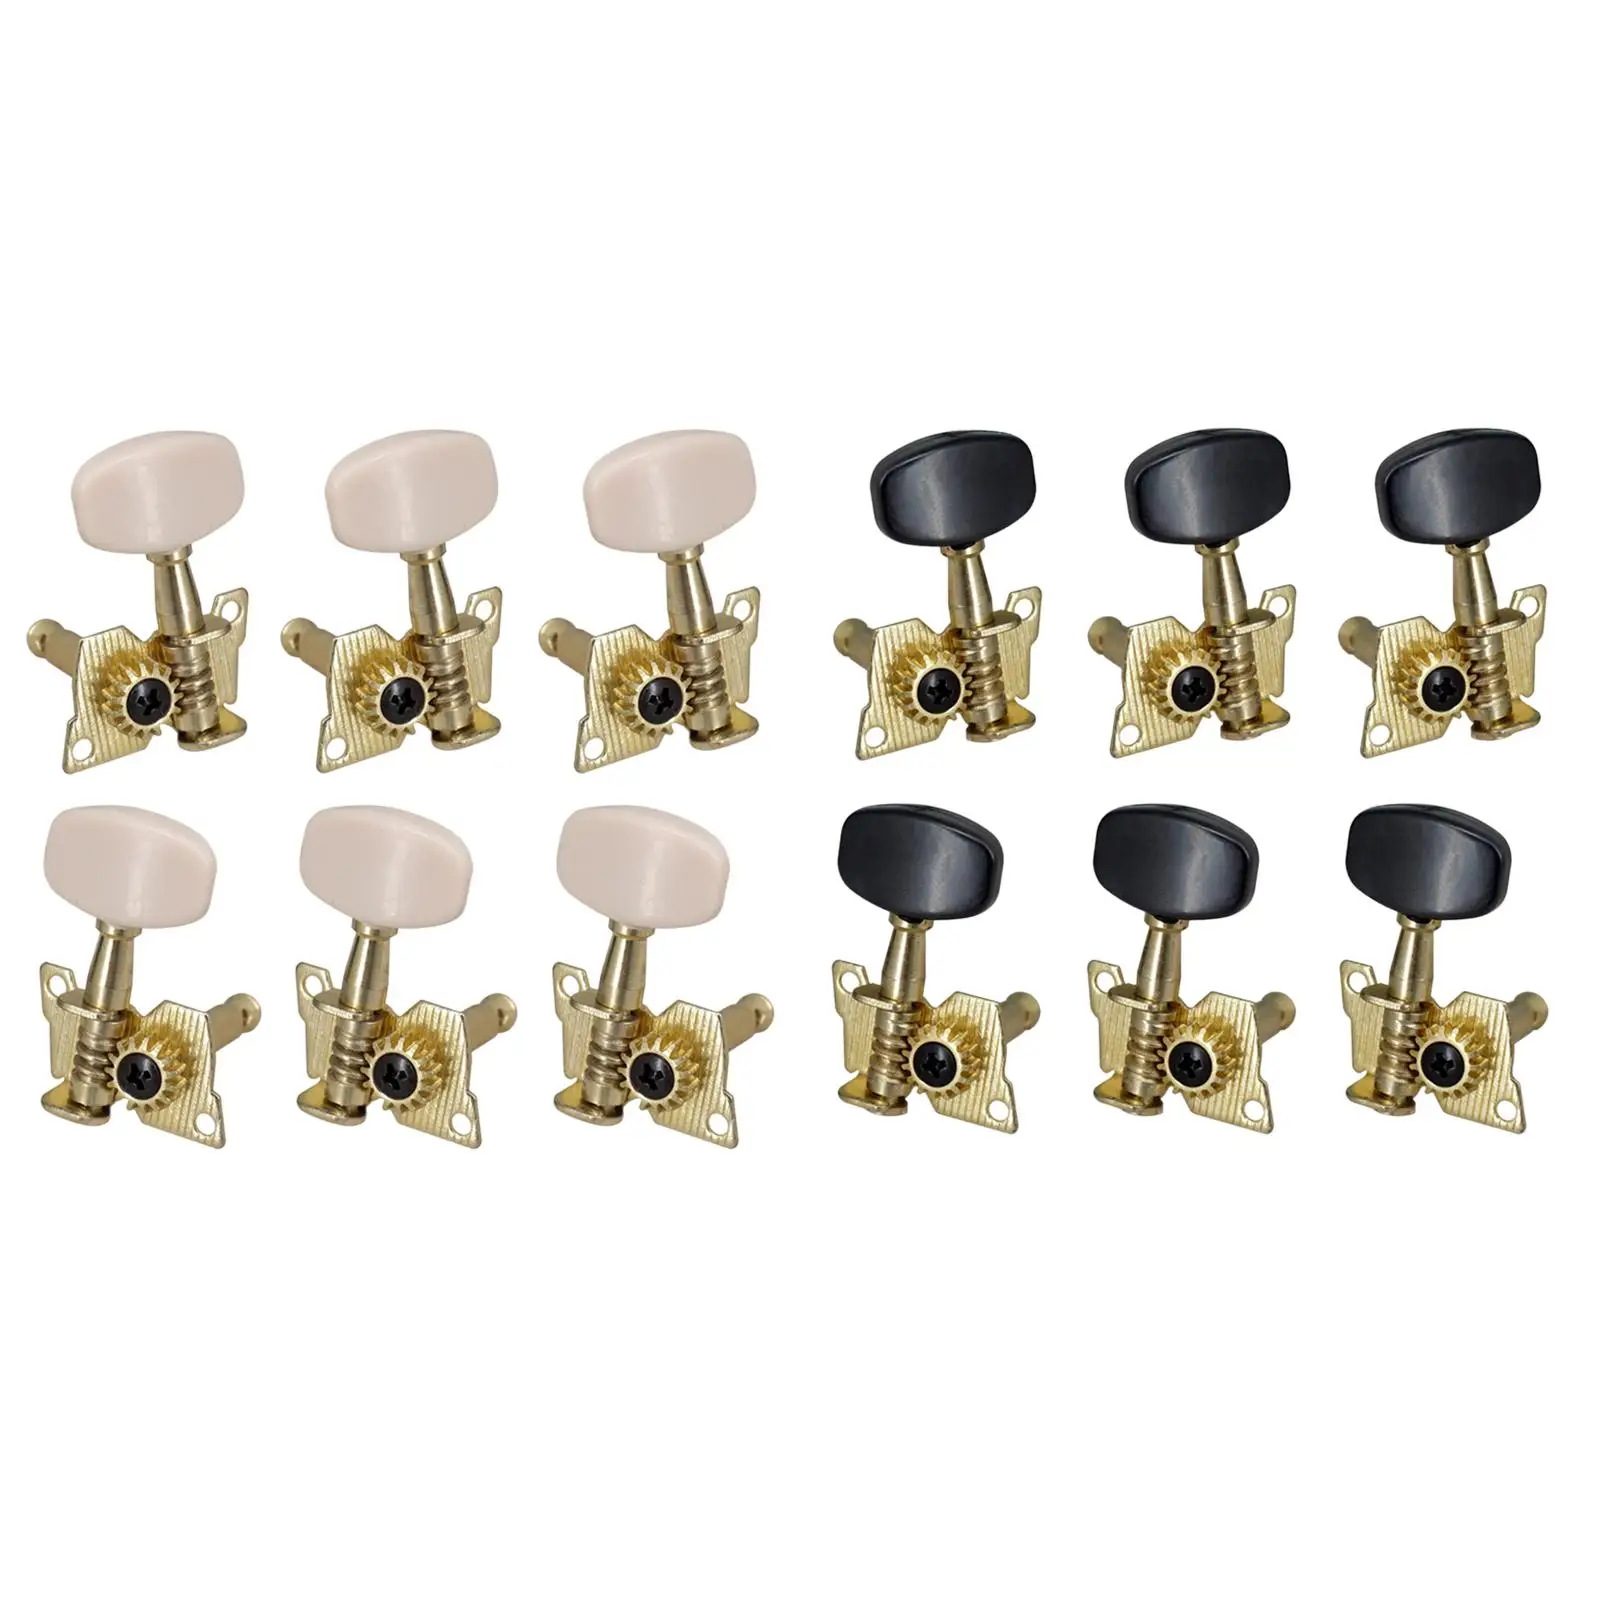 6x 3L3R Guitar Tuner Pegs Right Left Guitar Tuning Pegs for Electric Guitar Musical Instruments Replacement Parts